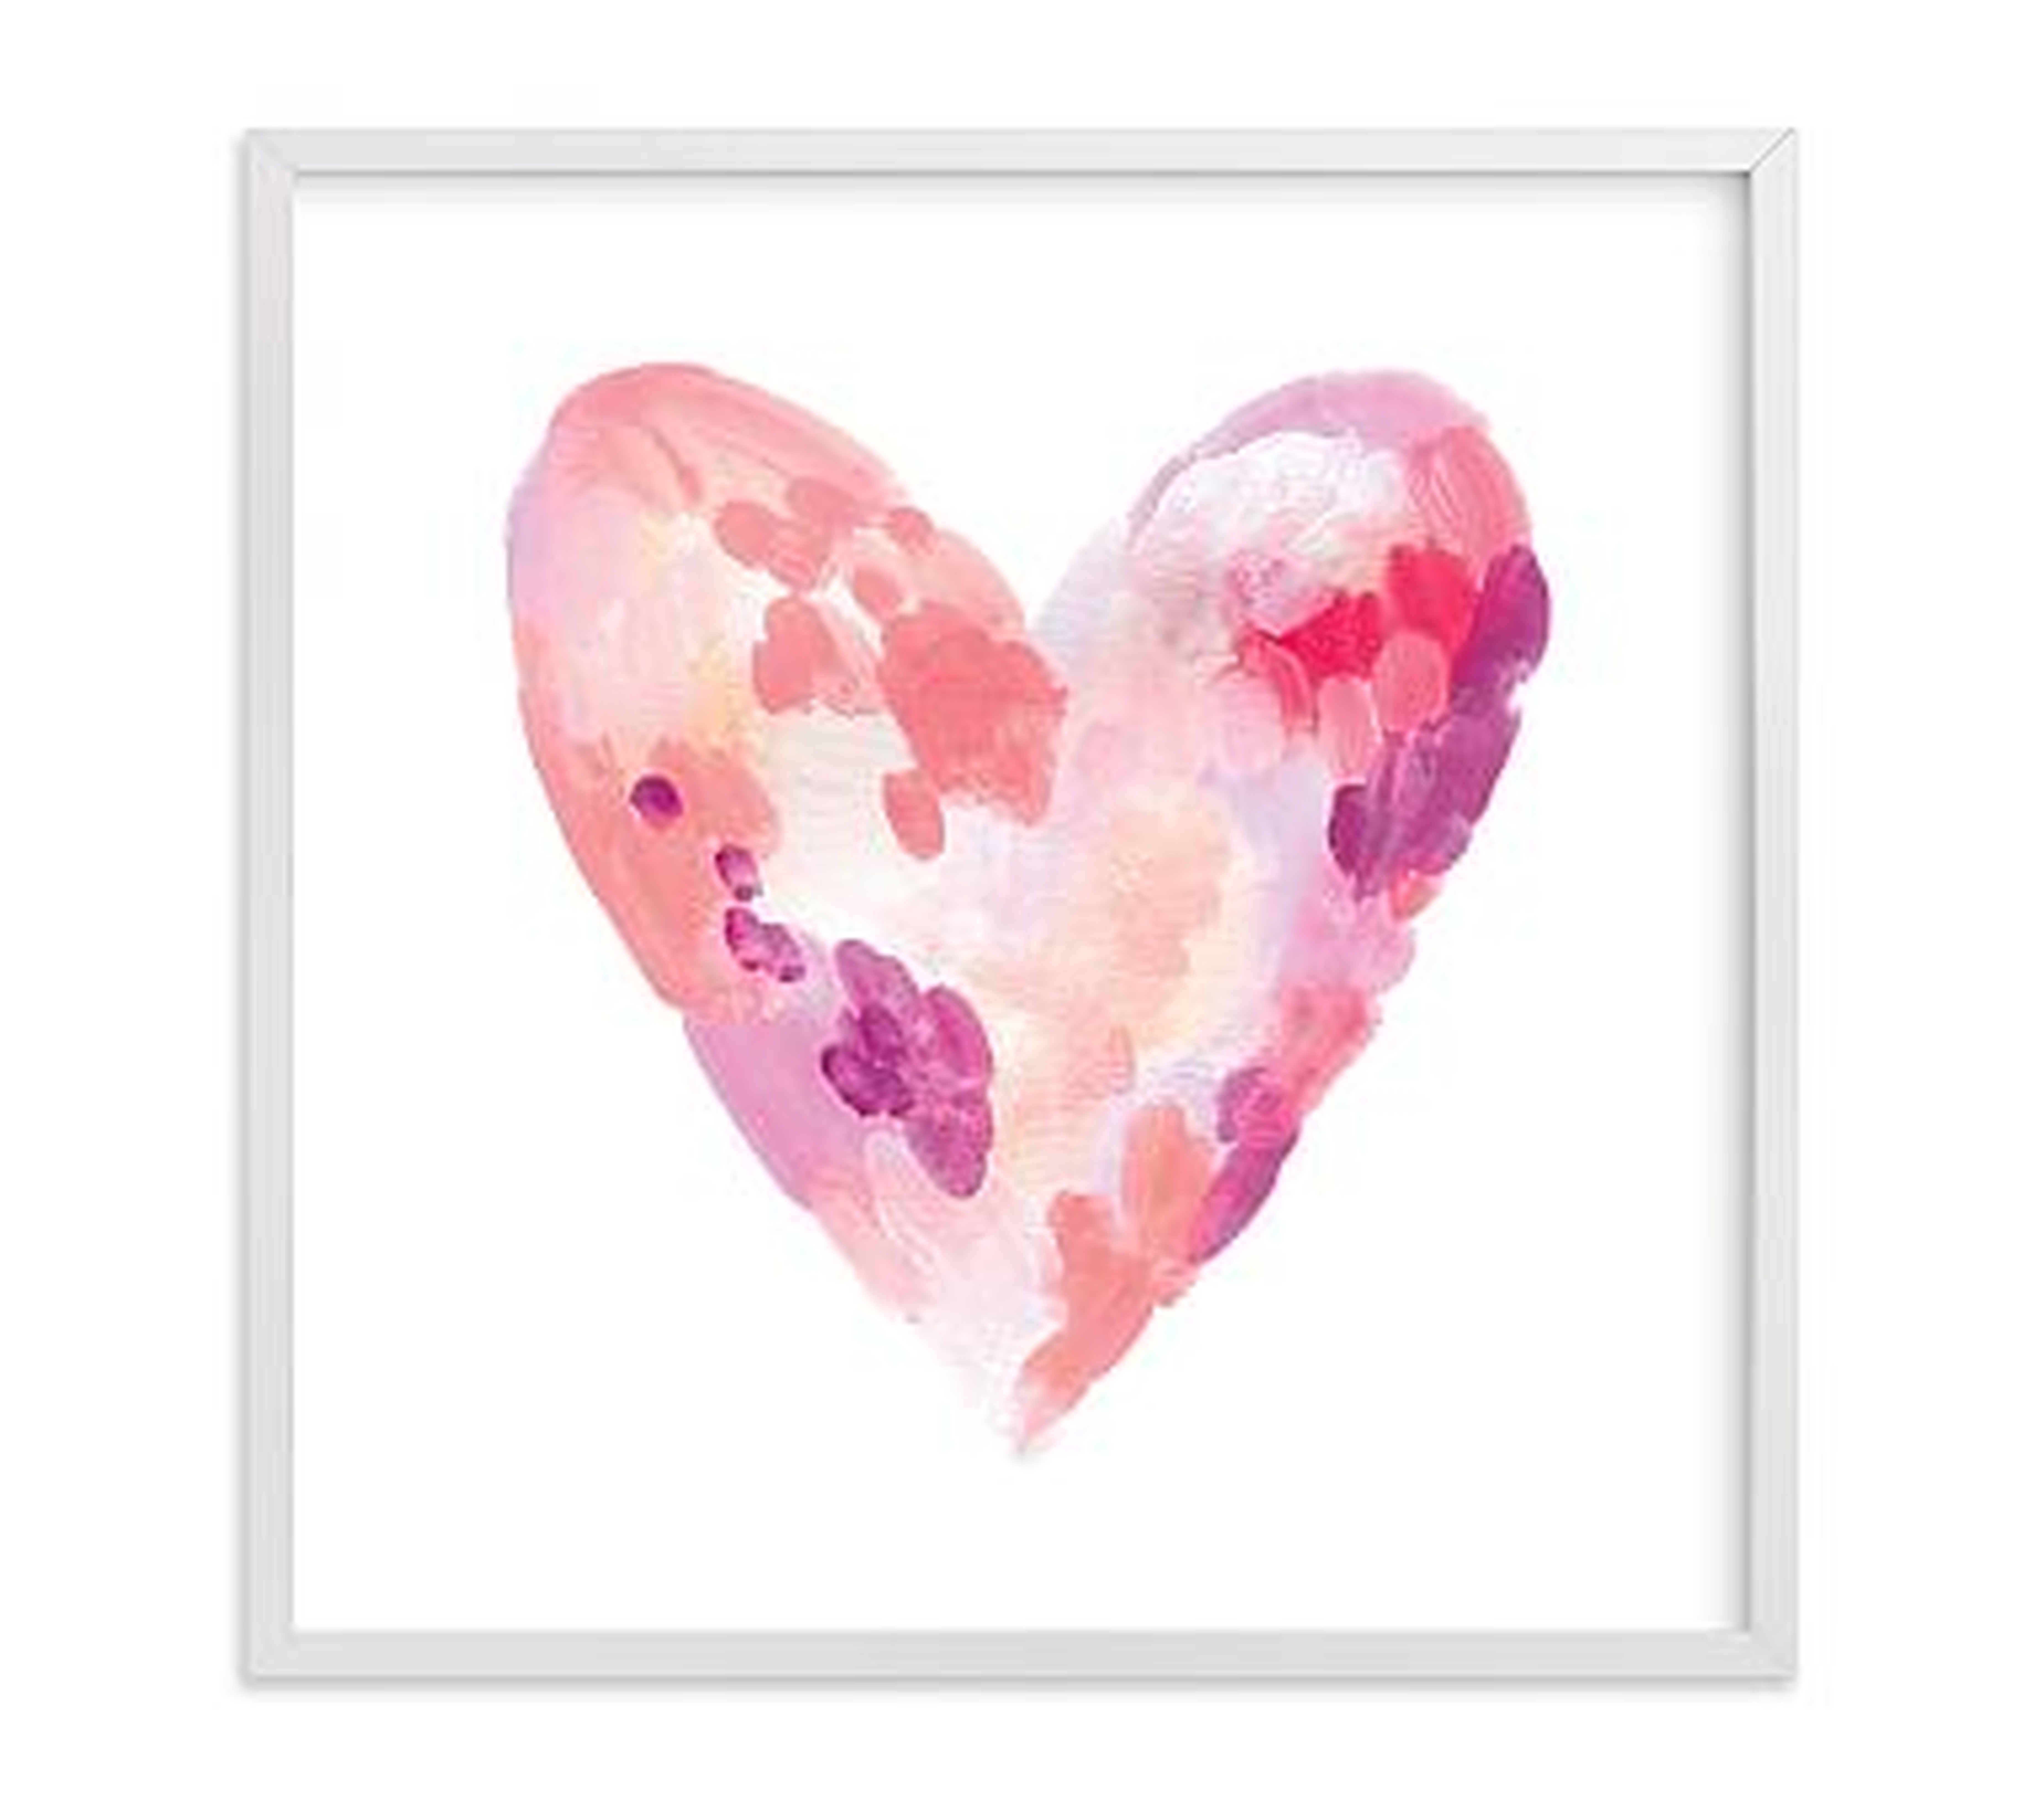 Abstract Heart Wall Art By Minted(R),11x11, White - Pottery Barn Kids